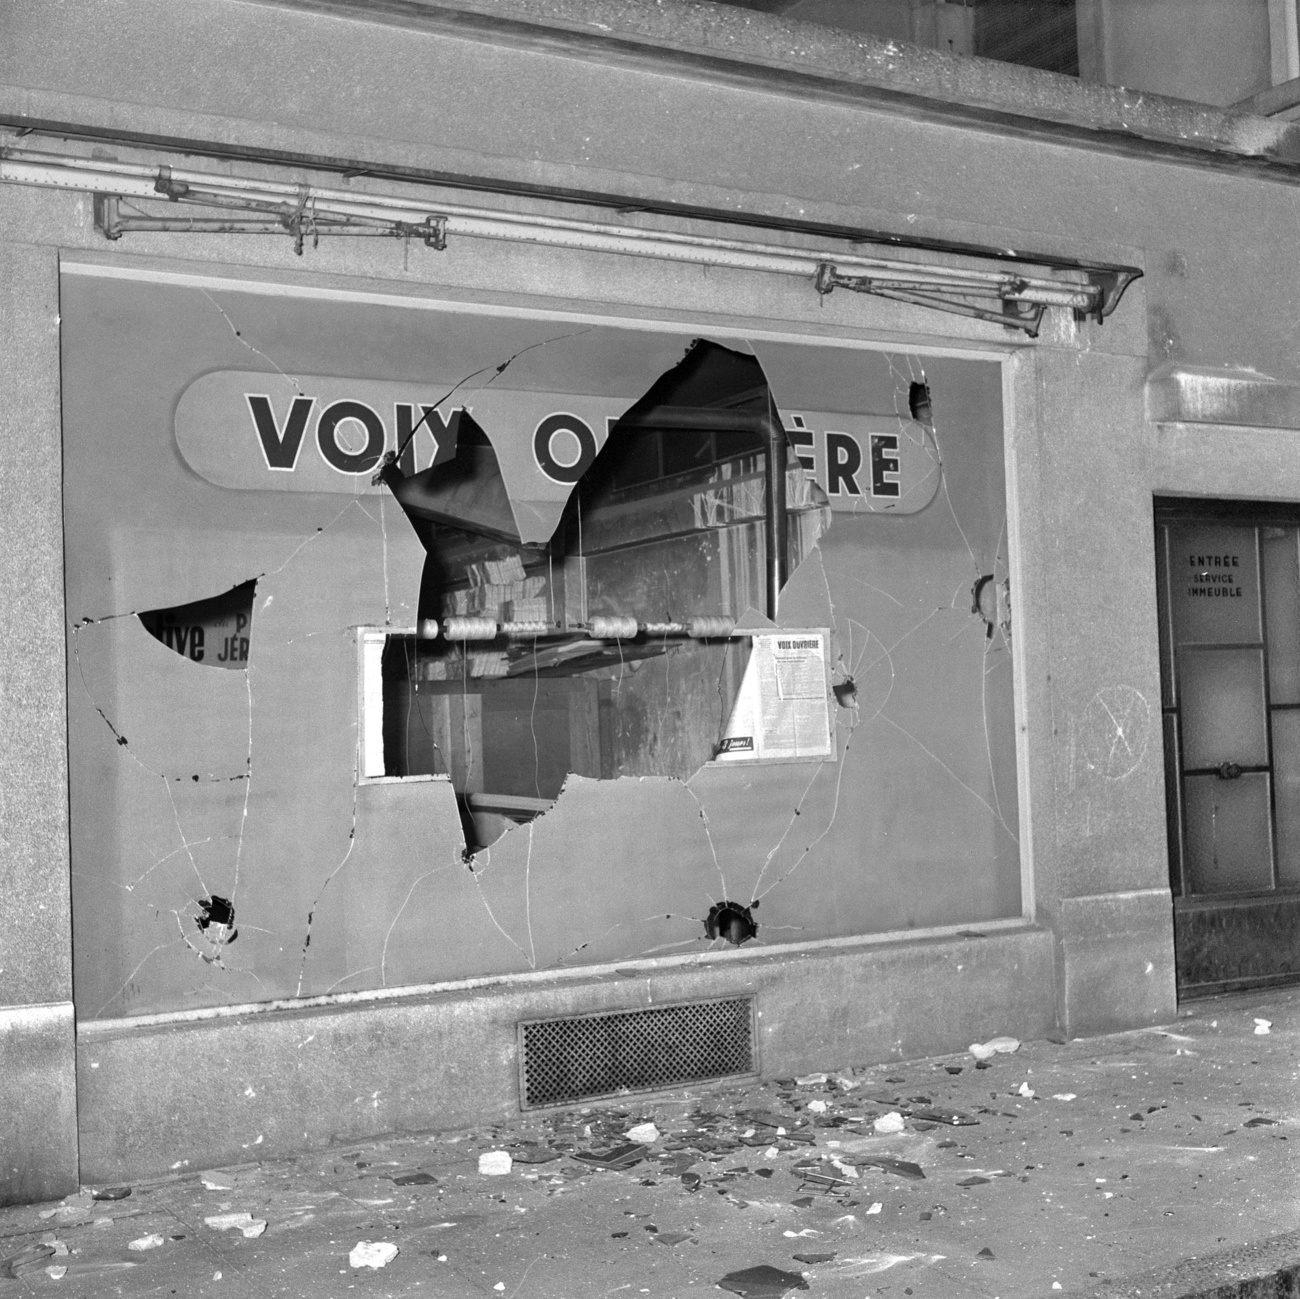 Following a peaceful rally on 7 November 1956 in Geneva for the freedom fighters of the Hungarian uprising, the publishing house of the communist newspaper "Voix Ouvriere" was damaged, along with other buildings.